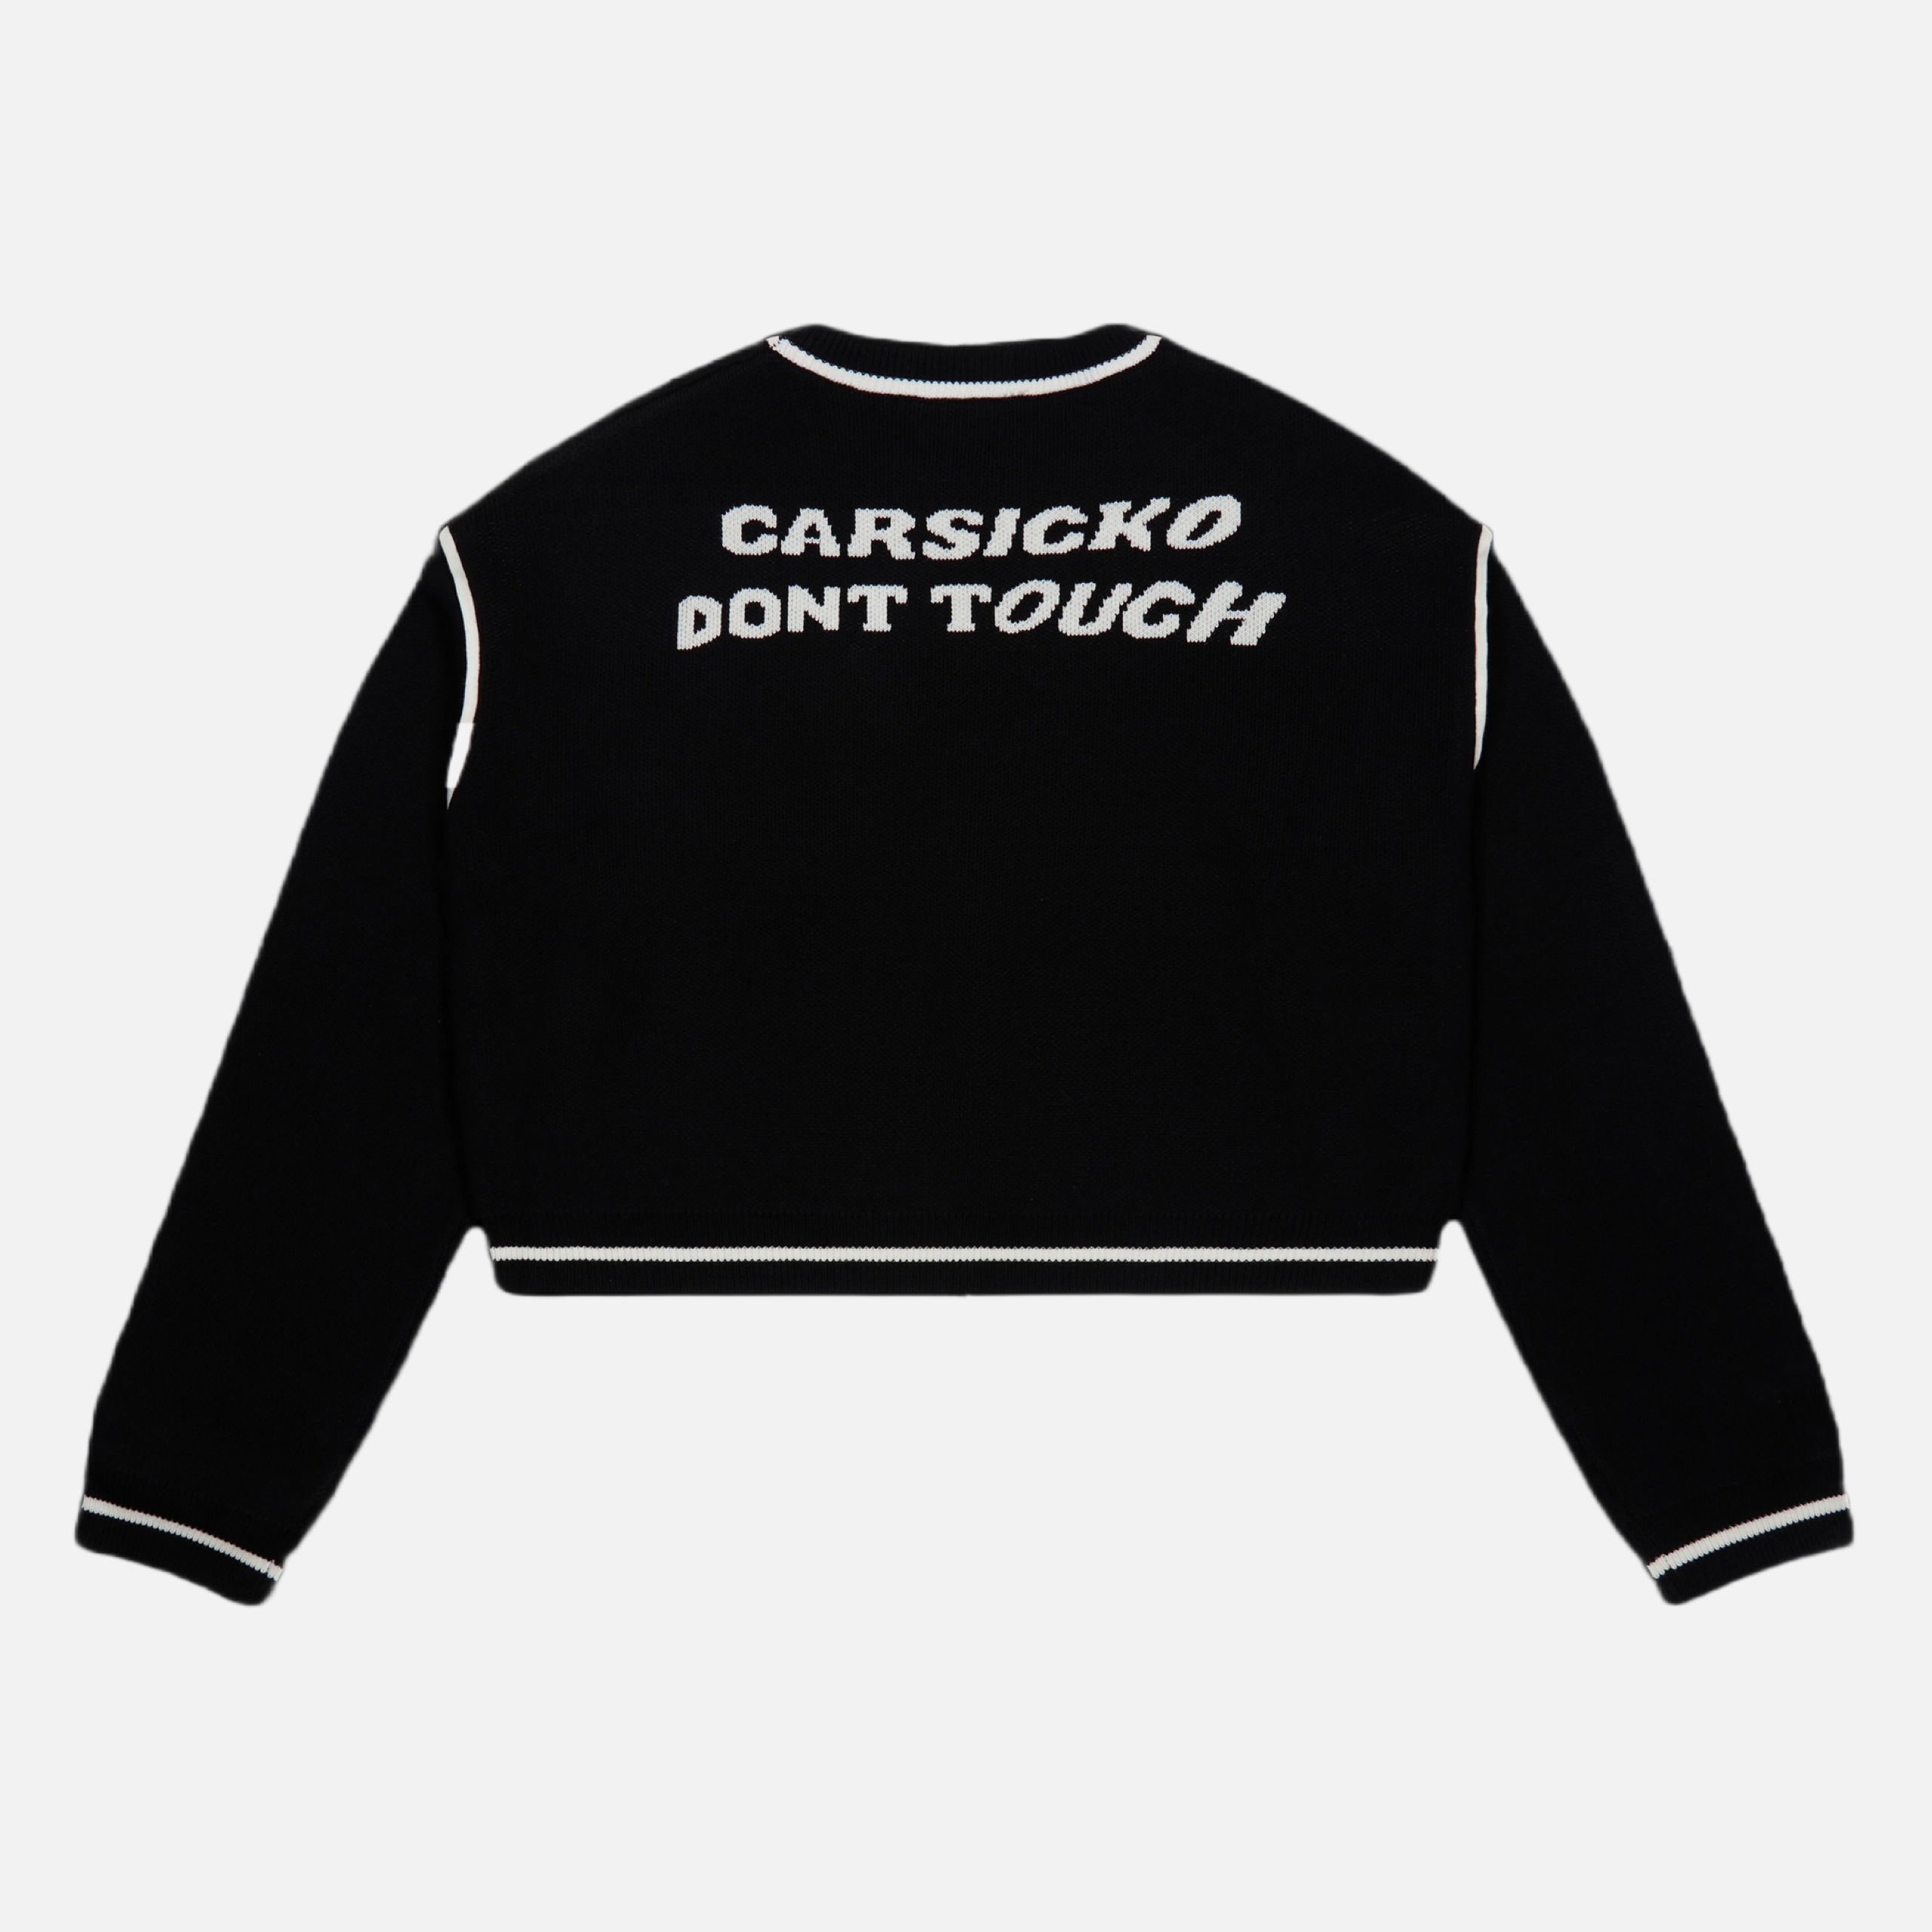 Black Carsicko Sweater with 'Don't Touch' Design - Back View